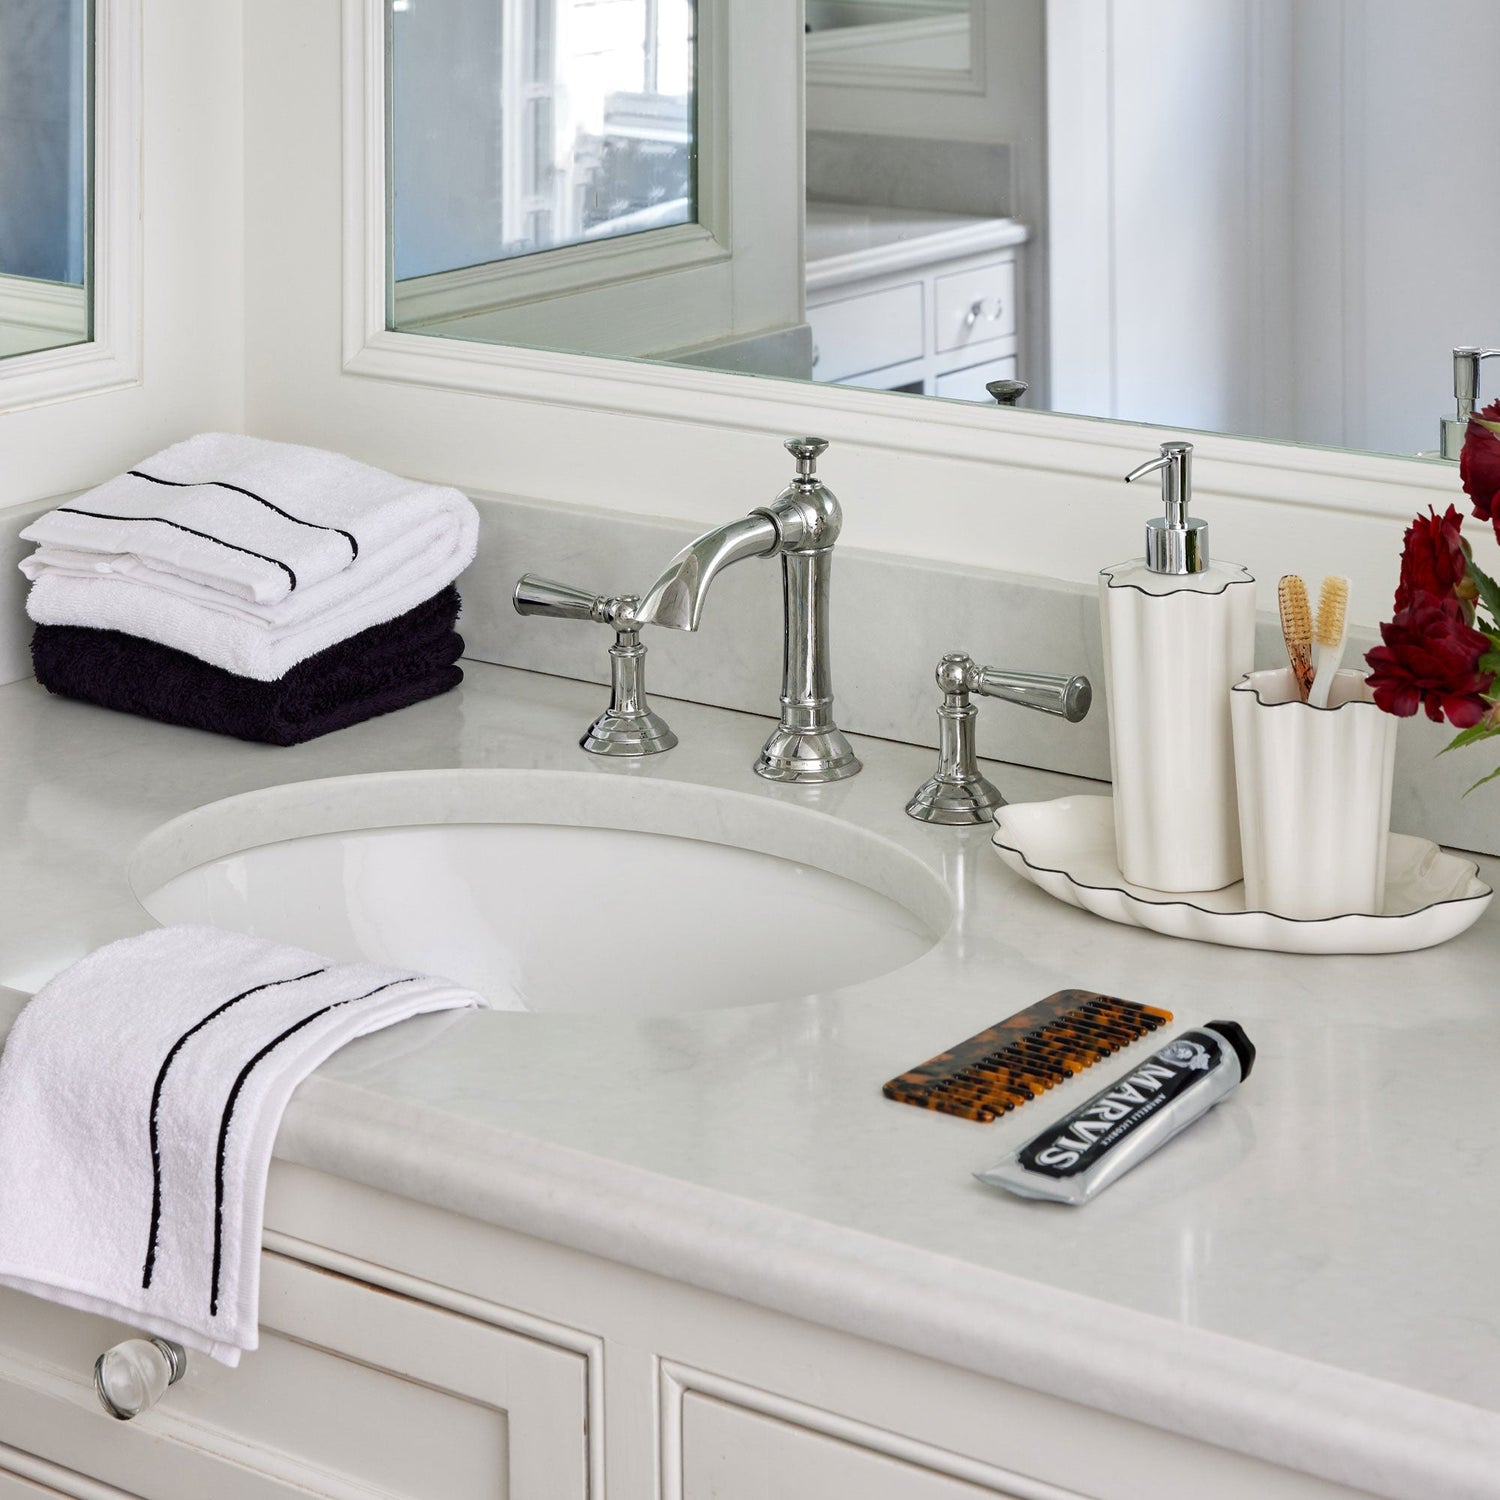 white ceramic lotion dispenser and tumbler on top of a white ceramic tray on a white marble bathroom counter next to a sink 